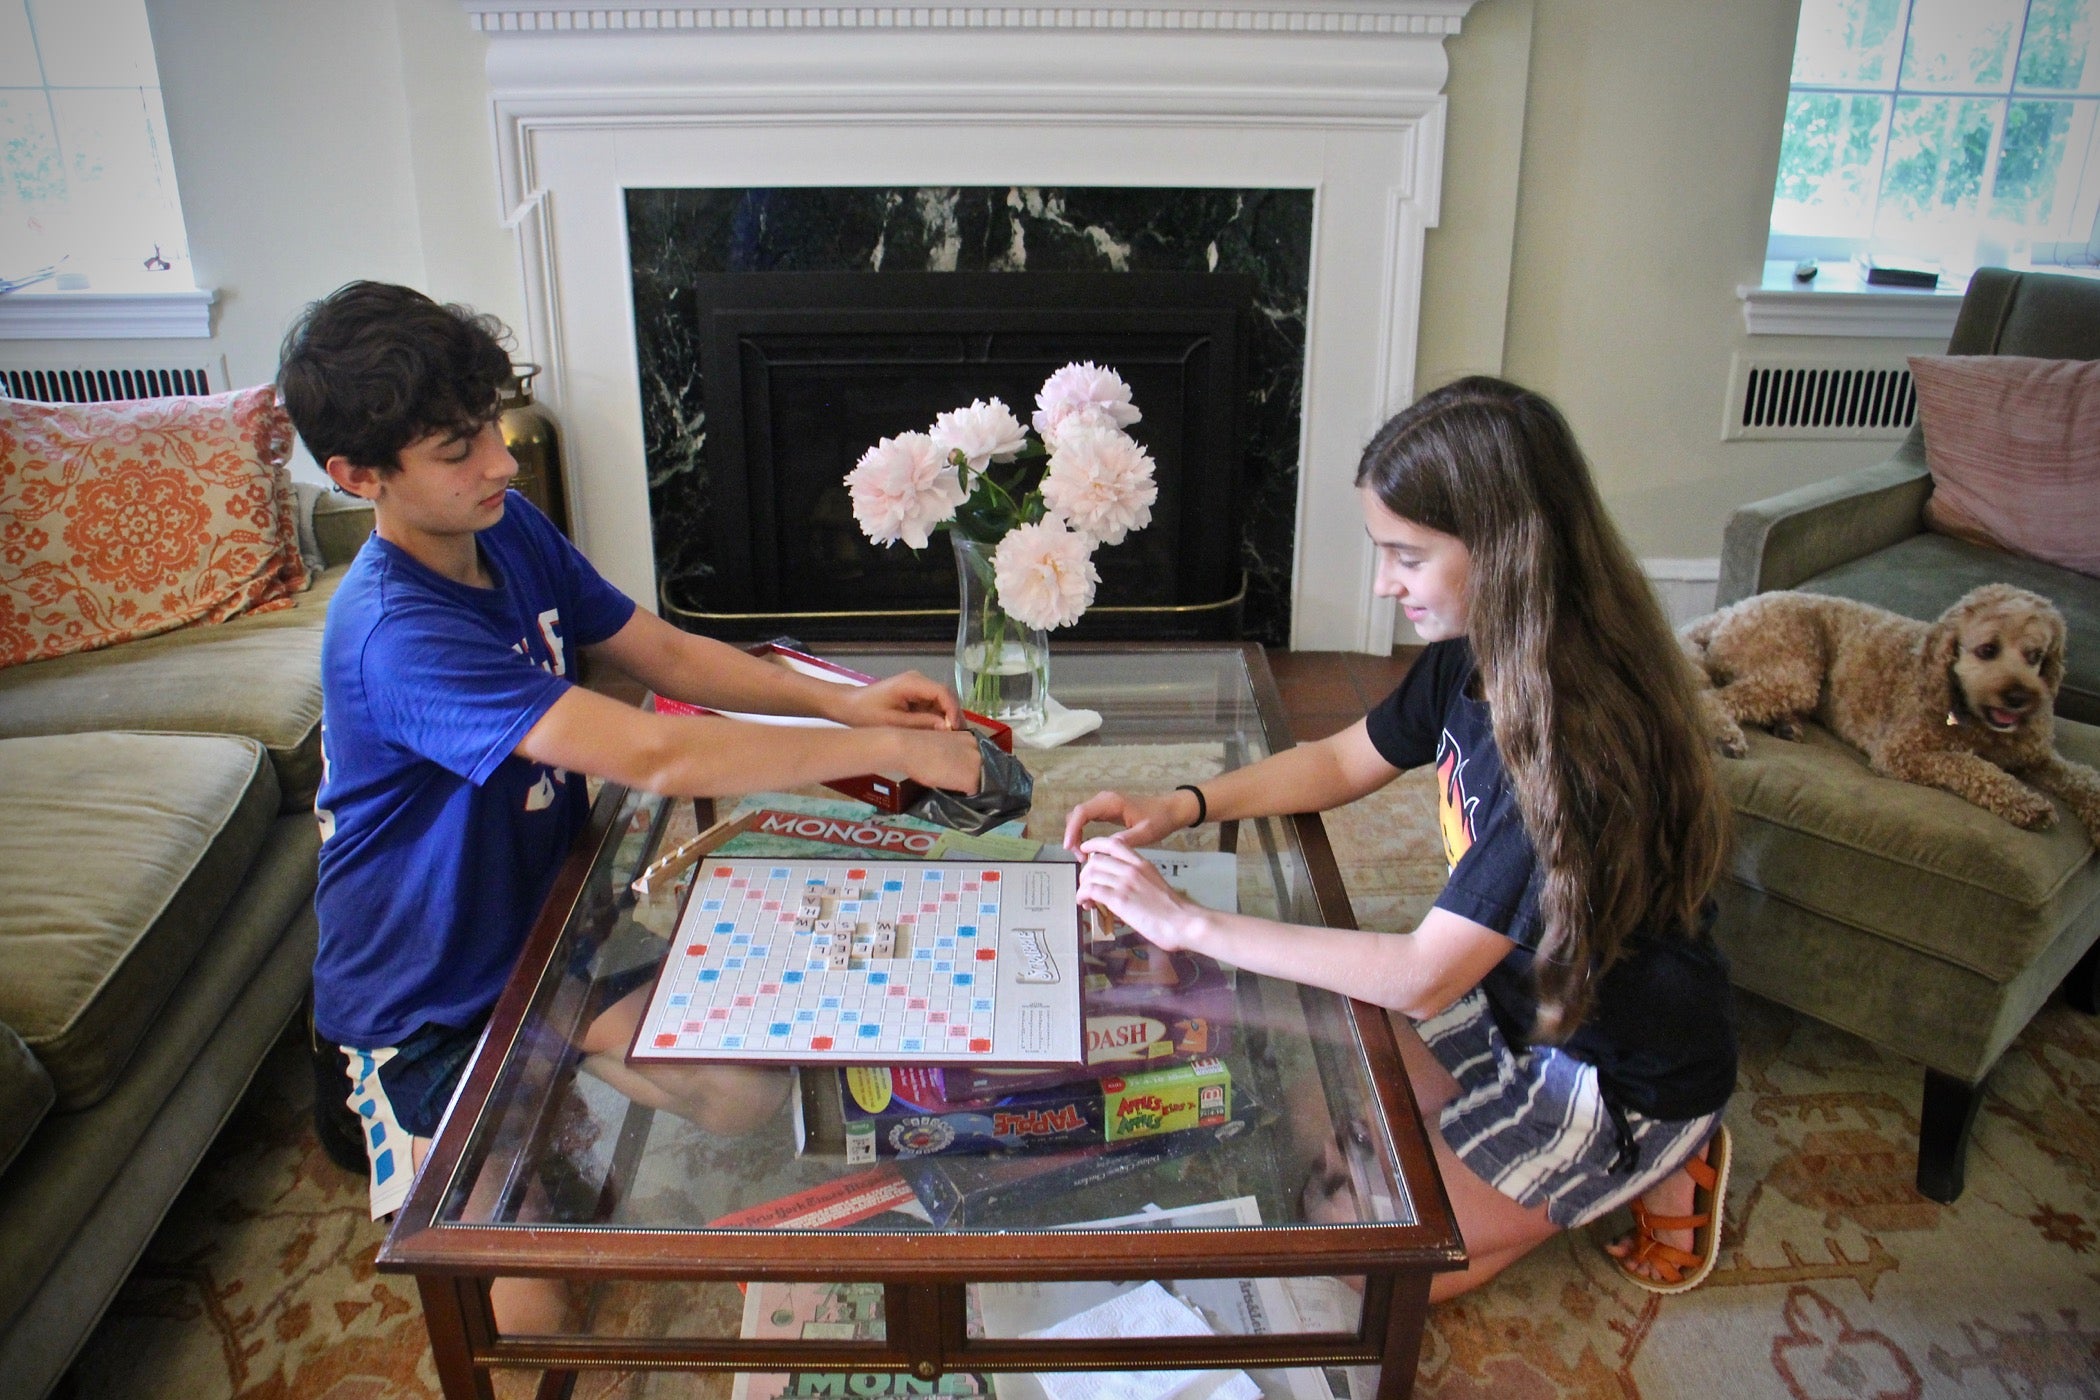 A teenage boy and his pre-teen sister kneel on the floor as they play Scrabble on a glass coffee table.